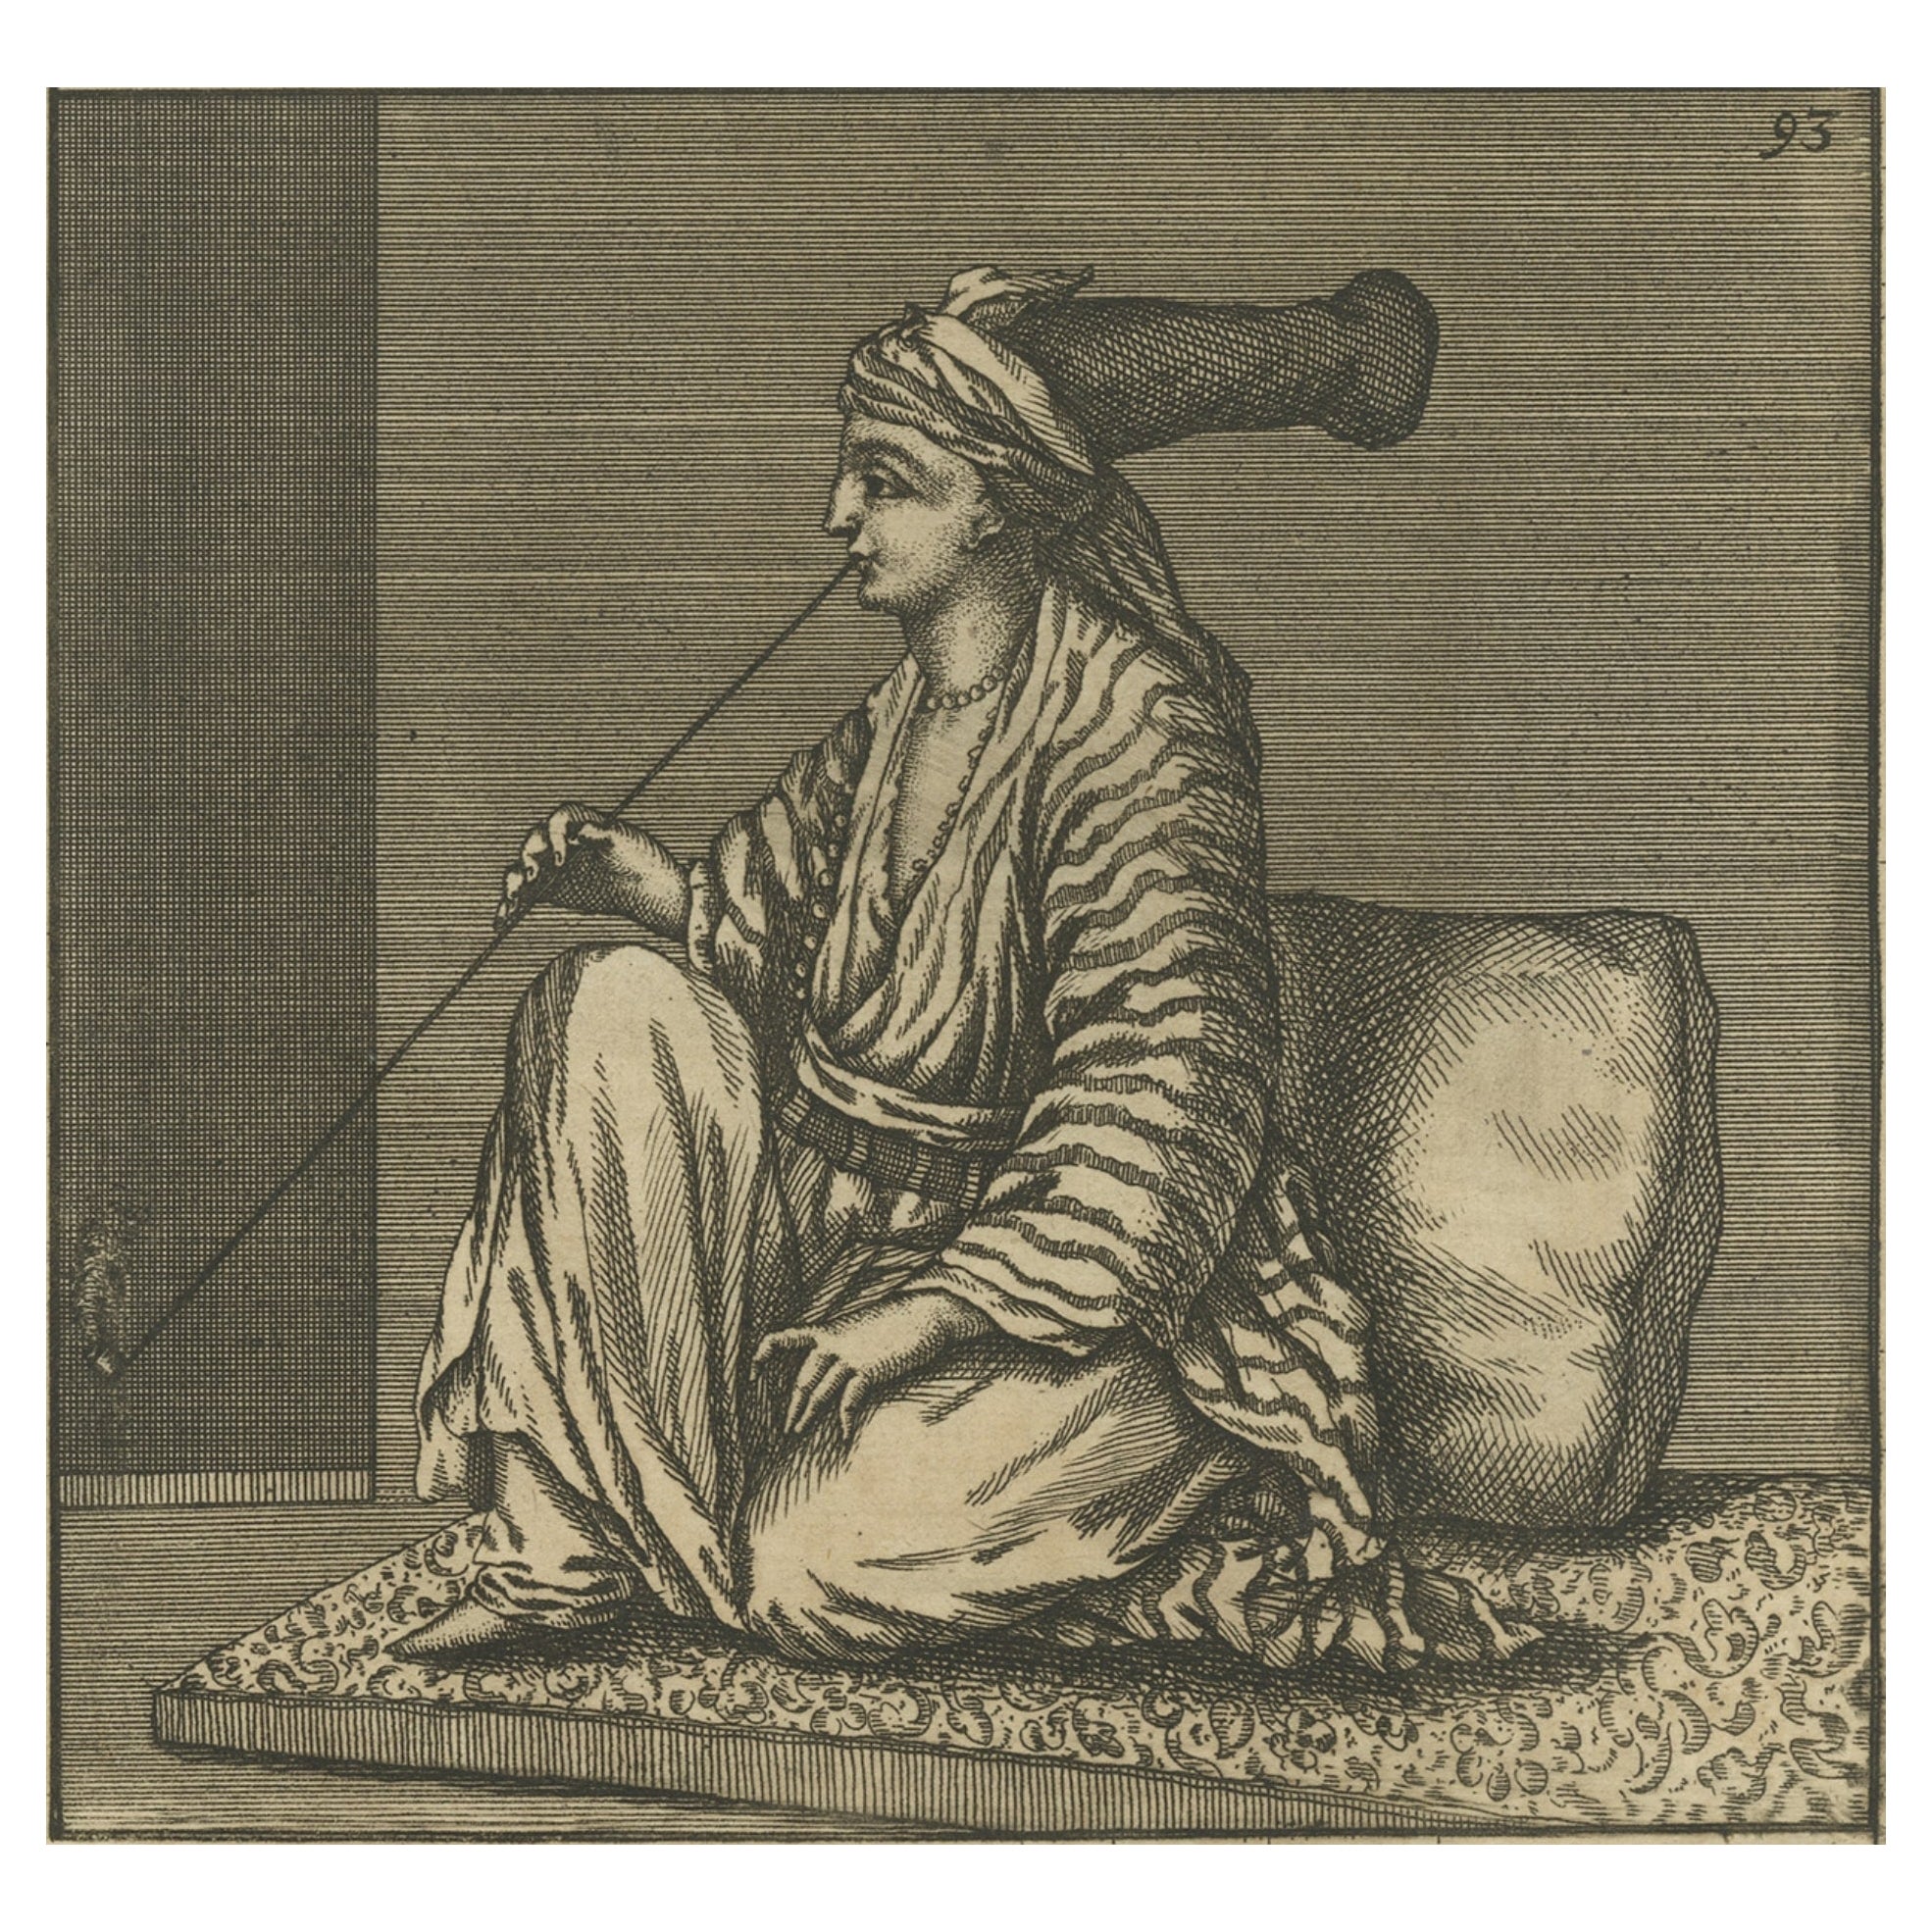 Old Antique Engraving of an Arab Sitting on a Carpet and Smoking a Pipe, 1698